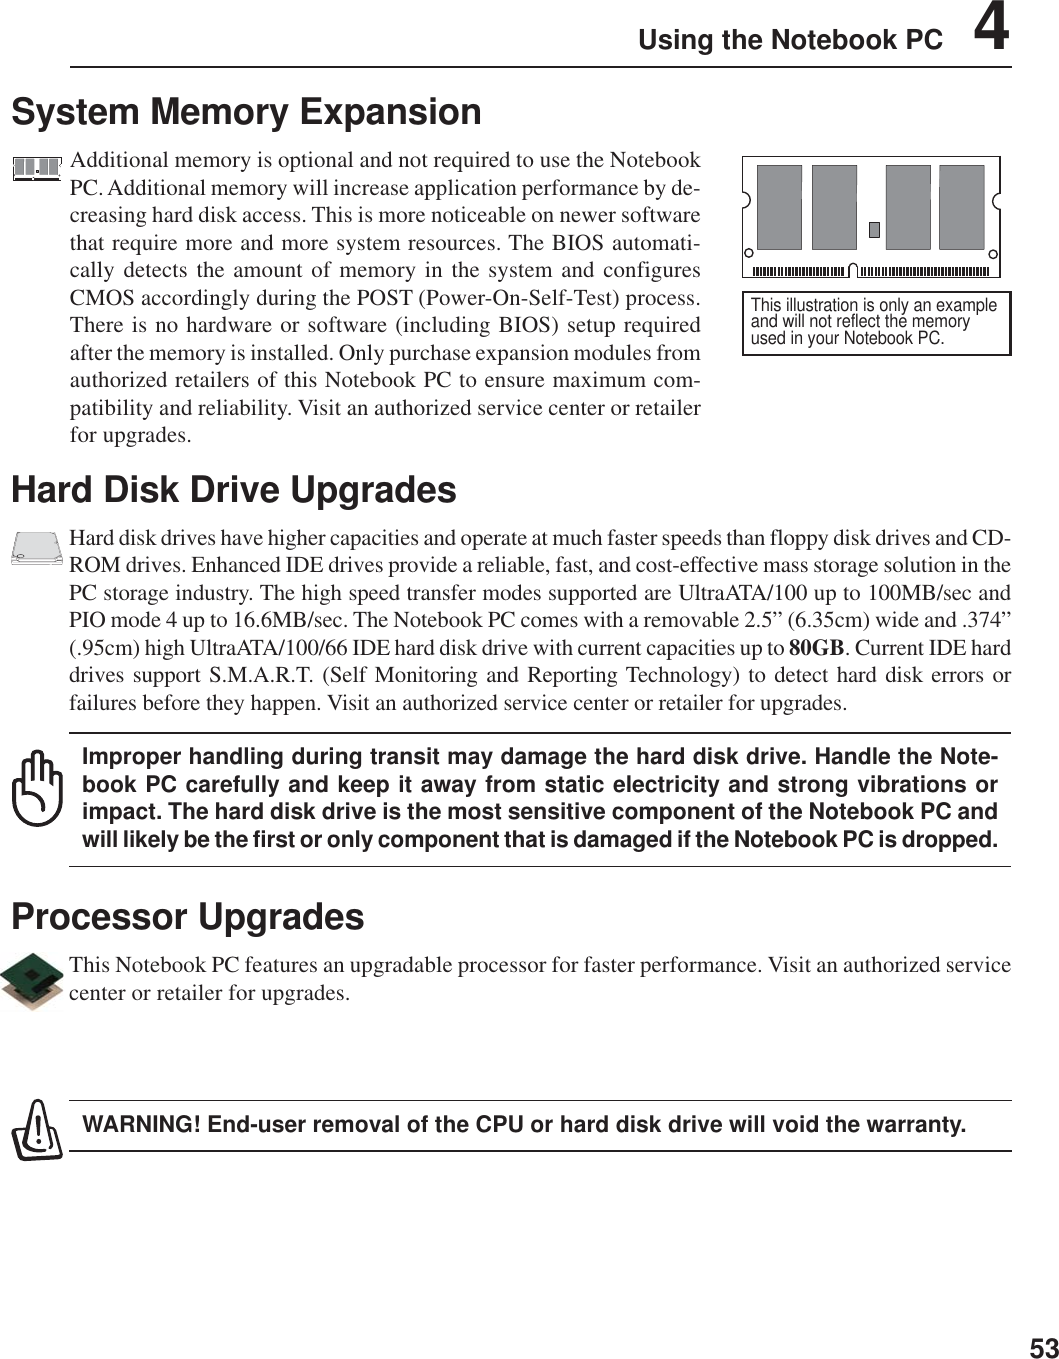 53Using the Notebook PC    4Hard Disk Drive UpgradesHard disk drives have higher capacities and operate at much faster speeds than floppy disk drives and CD-ROM drives. Enhanced IDE drives provide a reliable, fast, and cost-effective mass storage solution in thePC storage industry. The high speed transfer modes supported are UltraATA/100 up to 100MB/sec andPIO mode 4 up to 16.6MB/sec. The Notebook PC comes with a removable 2.5” (6.35cm) wide and .374”(.95cm) high UltraATA/100/66 IDE hard disk drive with current capacities up to 80GB. Current IDE harddrives support S.M.A.R.T. (Self Monitoring and Reporting Technology) to detect hard disk errors orfailures before they happen. Visit an authorized service center or retailer for upgrades.Improper handling during transit may damage the hard disk drive. Handle the Note-book PC carefully and keep it away from static electricity and strong vibrations orimpact. The hard disk drive is the most sensitive component of the Notebook PC andwill likely be the first or only component that is damaged if the Notebook PC is dropped.Processor UpgradesThis Notebook PC features an upgradable processor for faster performance. Visit an authorized servicecenter or retailer for upgrades.WARNING! End-user removal of the CPU or hard disk drive will void the warranty.System Memory ExpansionAdditional memory is optional and not required to use the NotebookPC. Additional memory will increase application performance by de-creasing hard disk access. This is more noticeable on newer softwarethat require more and more system resources. The BIOS automati-cally detects the amount of memory in the system and configuresCMOS accordingly during the POST (Power-On-Self-Test) process.There is no hardware or software (including BIOS) setup requiredafter the memory is installed. Only purchase expansion modules fromauthorized retailers of this Notebook PC to ensure maximum com-patibility and reliability. Visit an authorized service center or retailerfor upgrades.This illustration is only an exampleand will not reflect the memoryused in your Notebook PC.